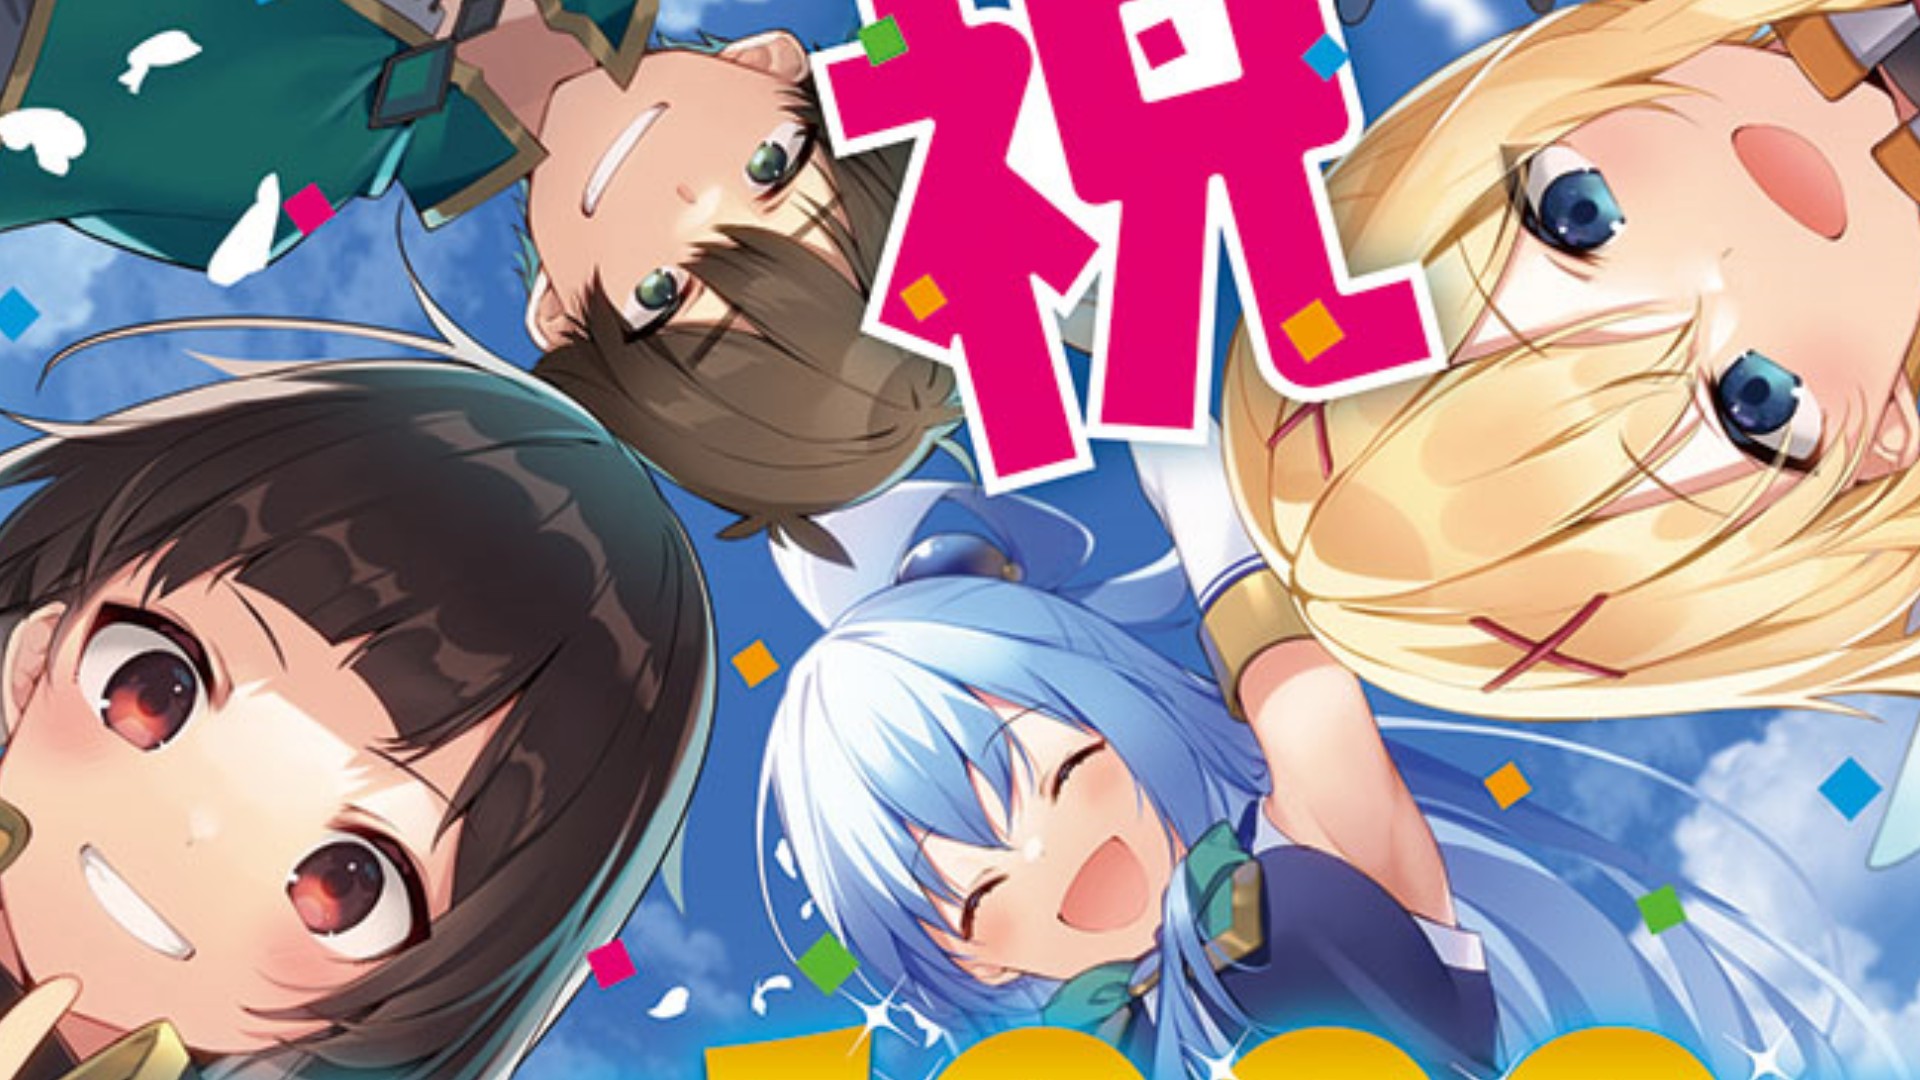 The New Konosuba Anime Project is Officially Announced